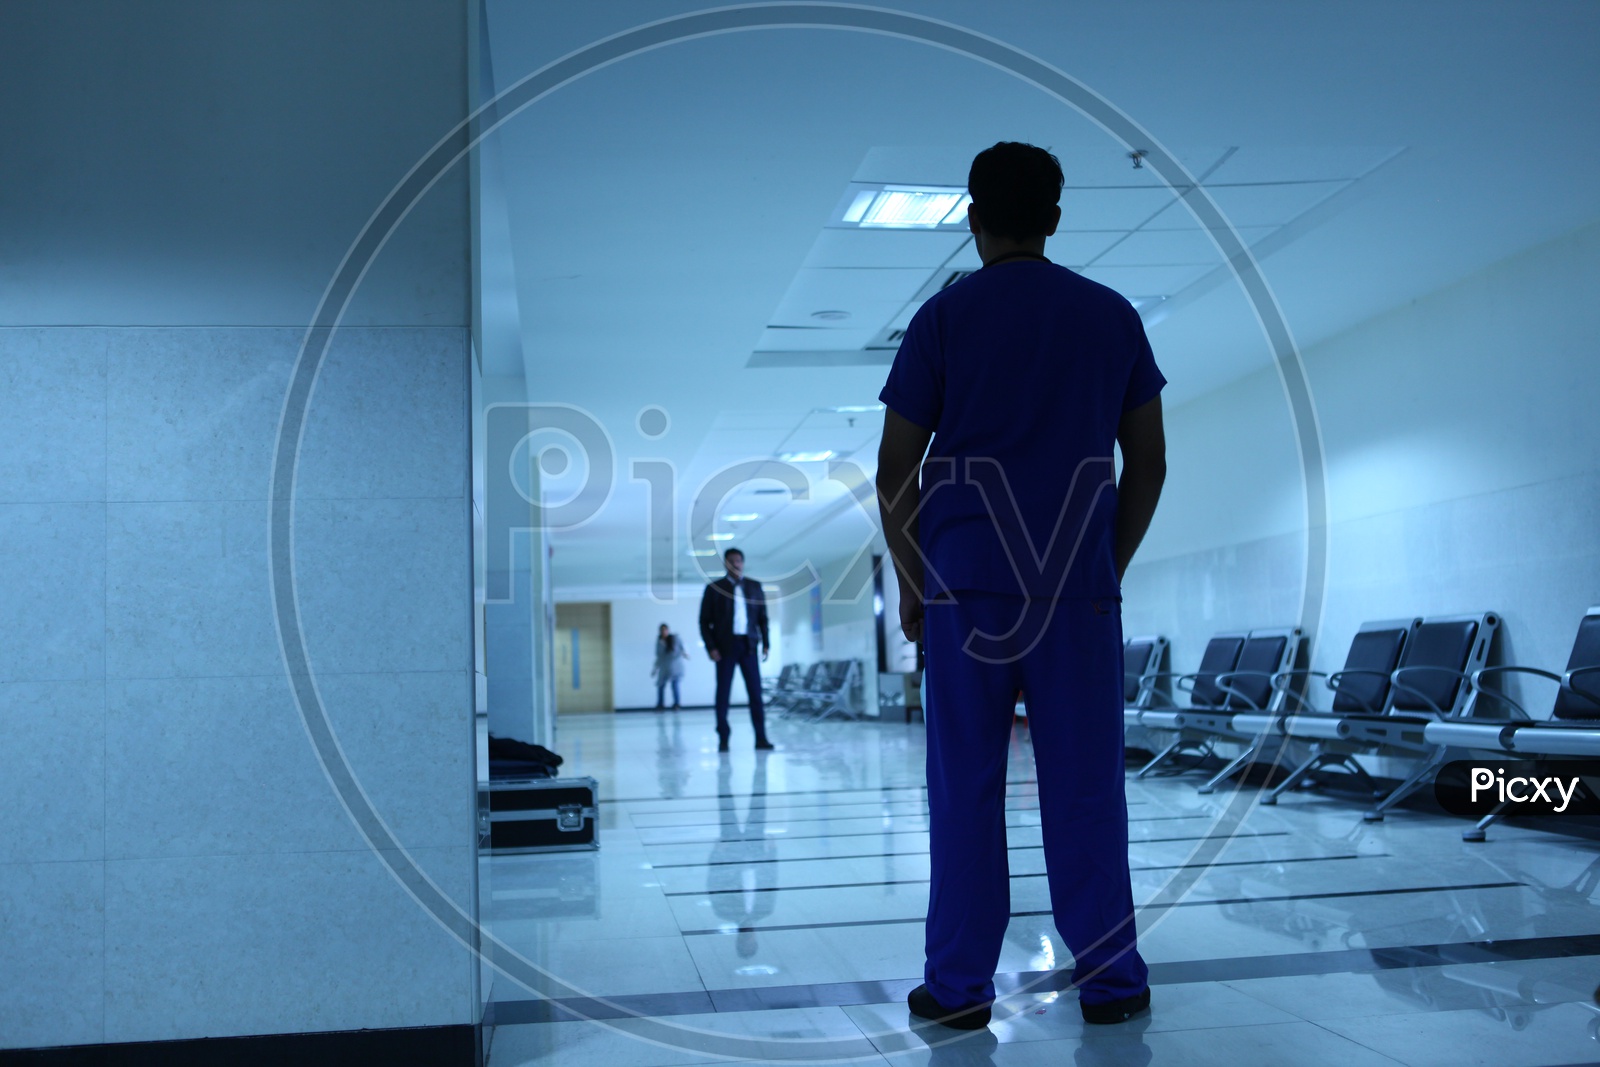 Silhouette Of People Standing In a Hospital Corridor